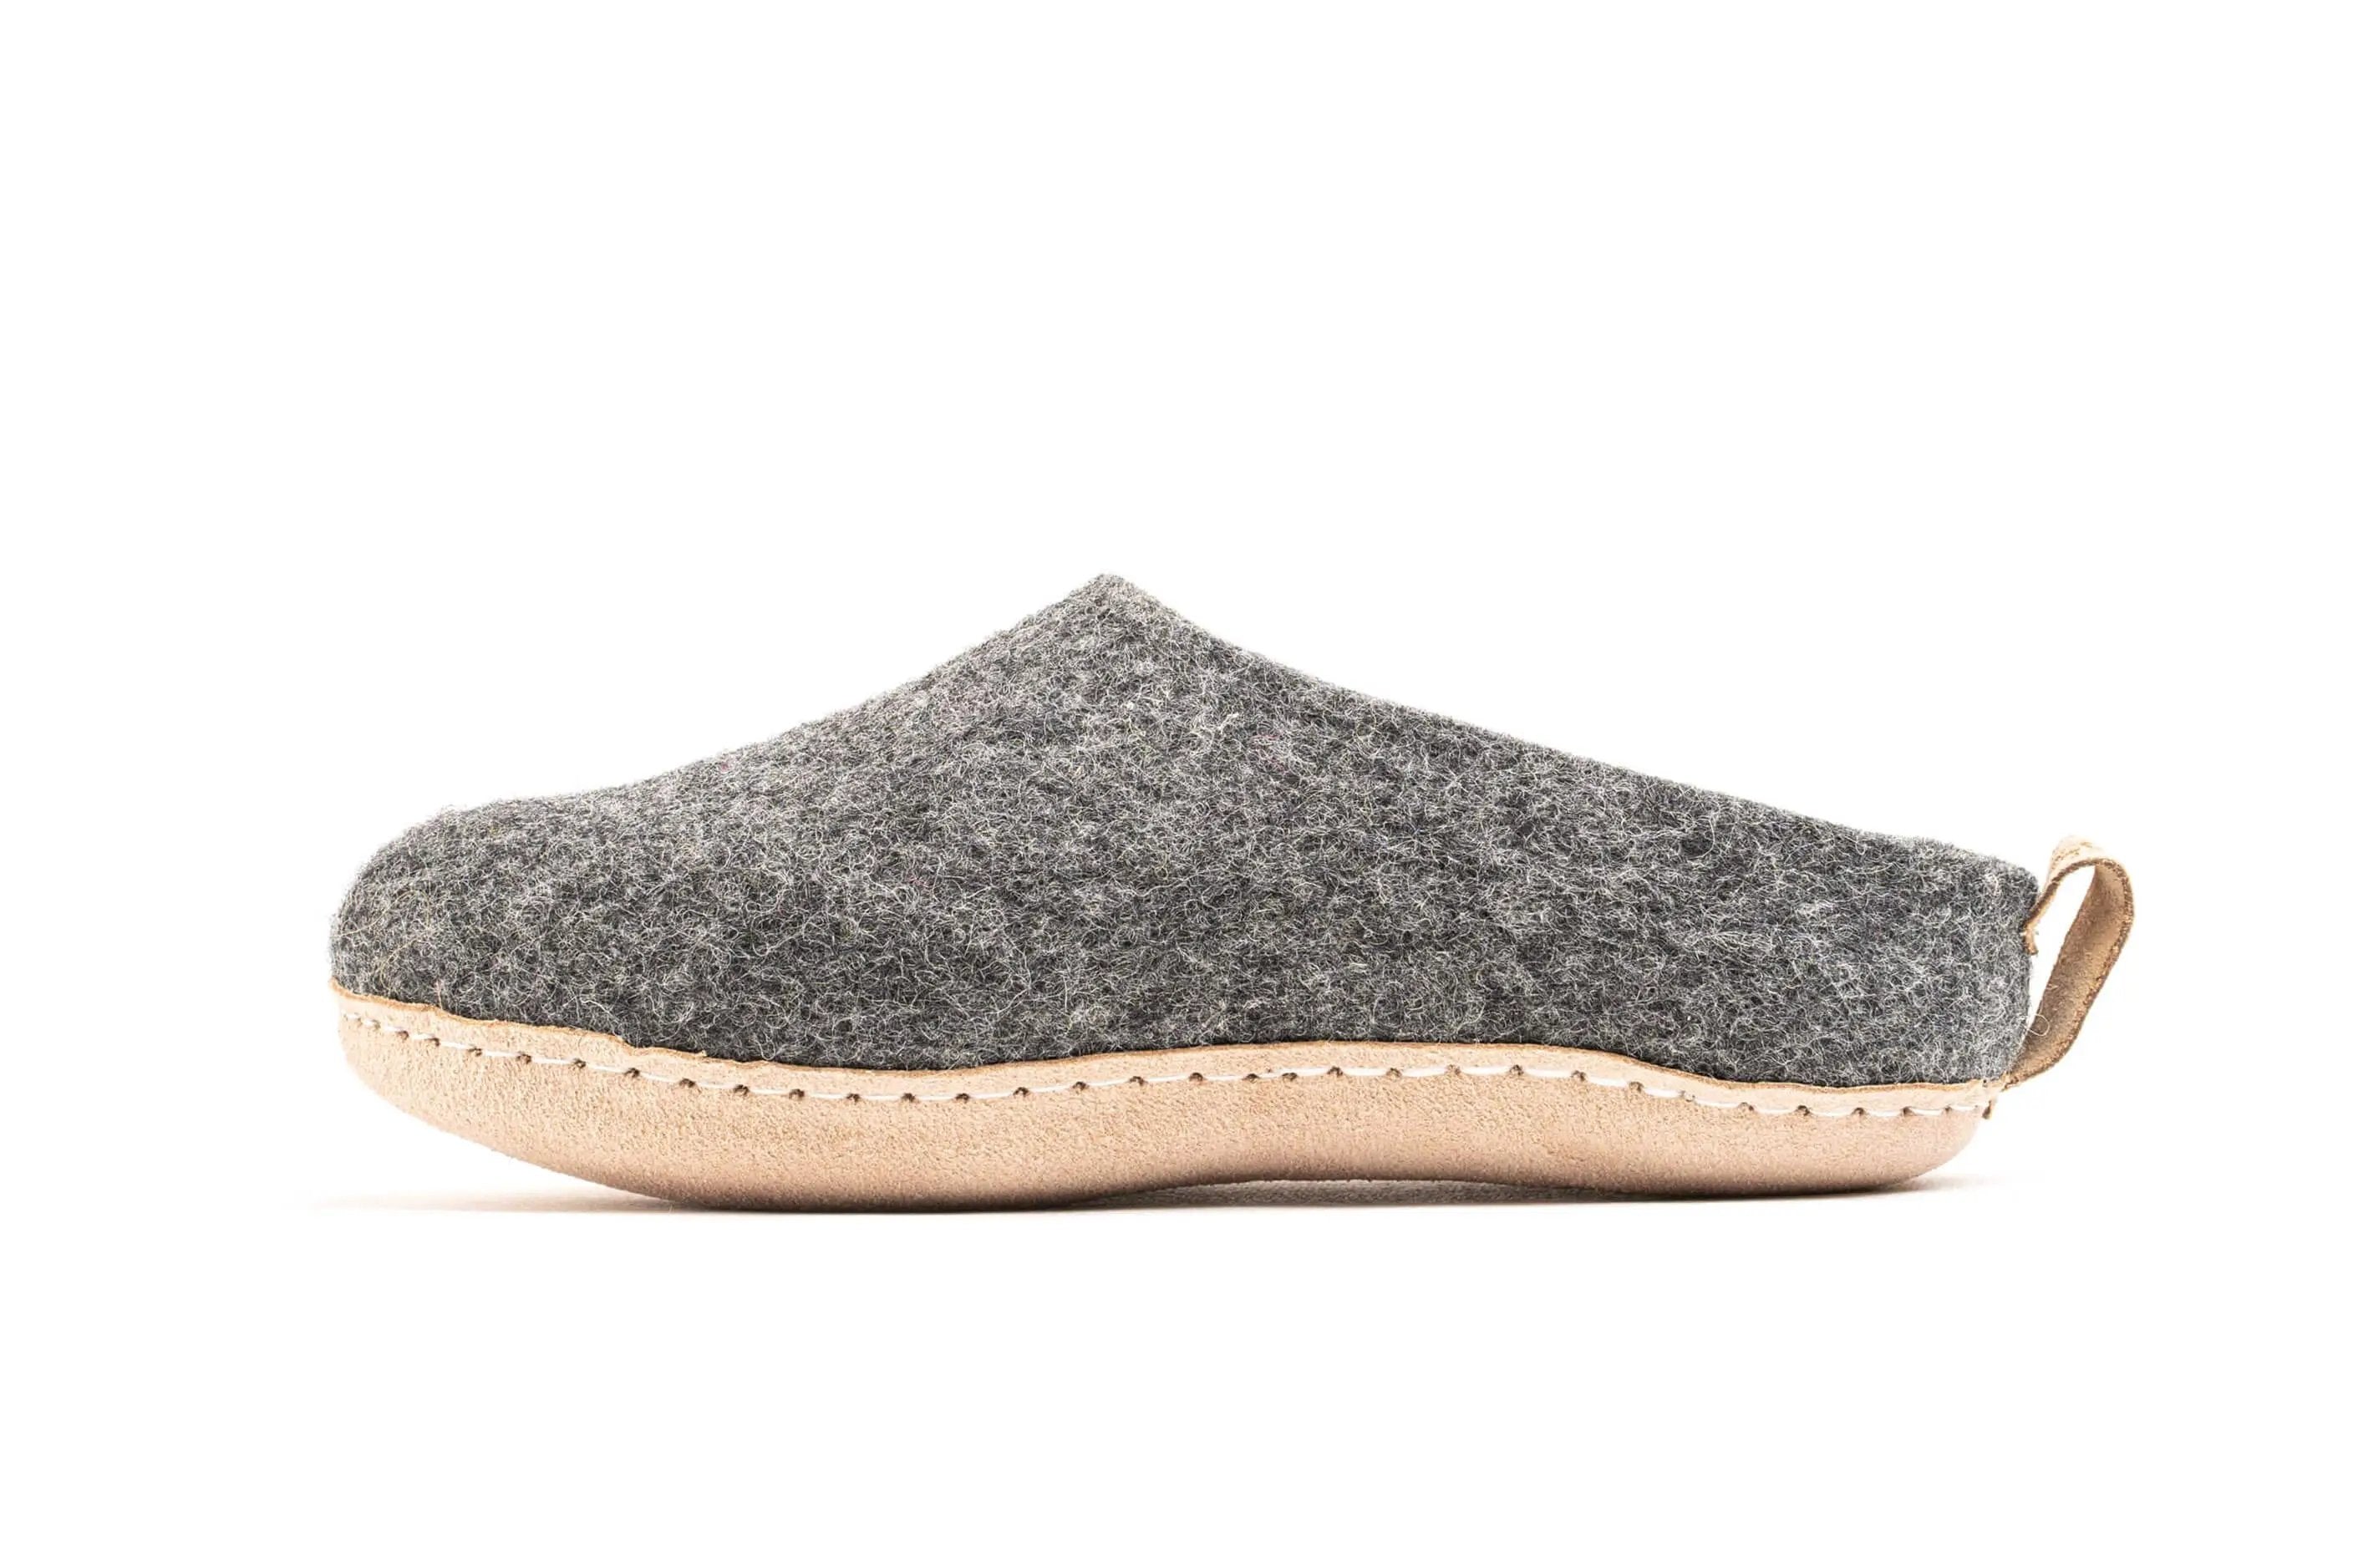 Indoor Open Heel Slippers With Leather Sole - Charcoal